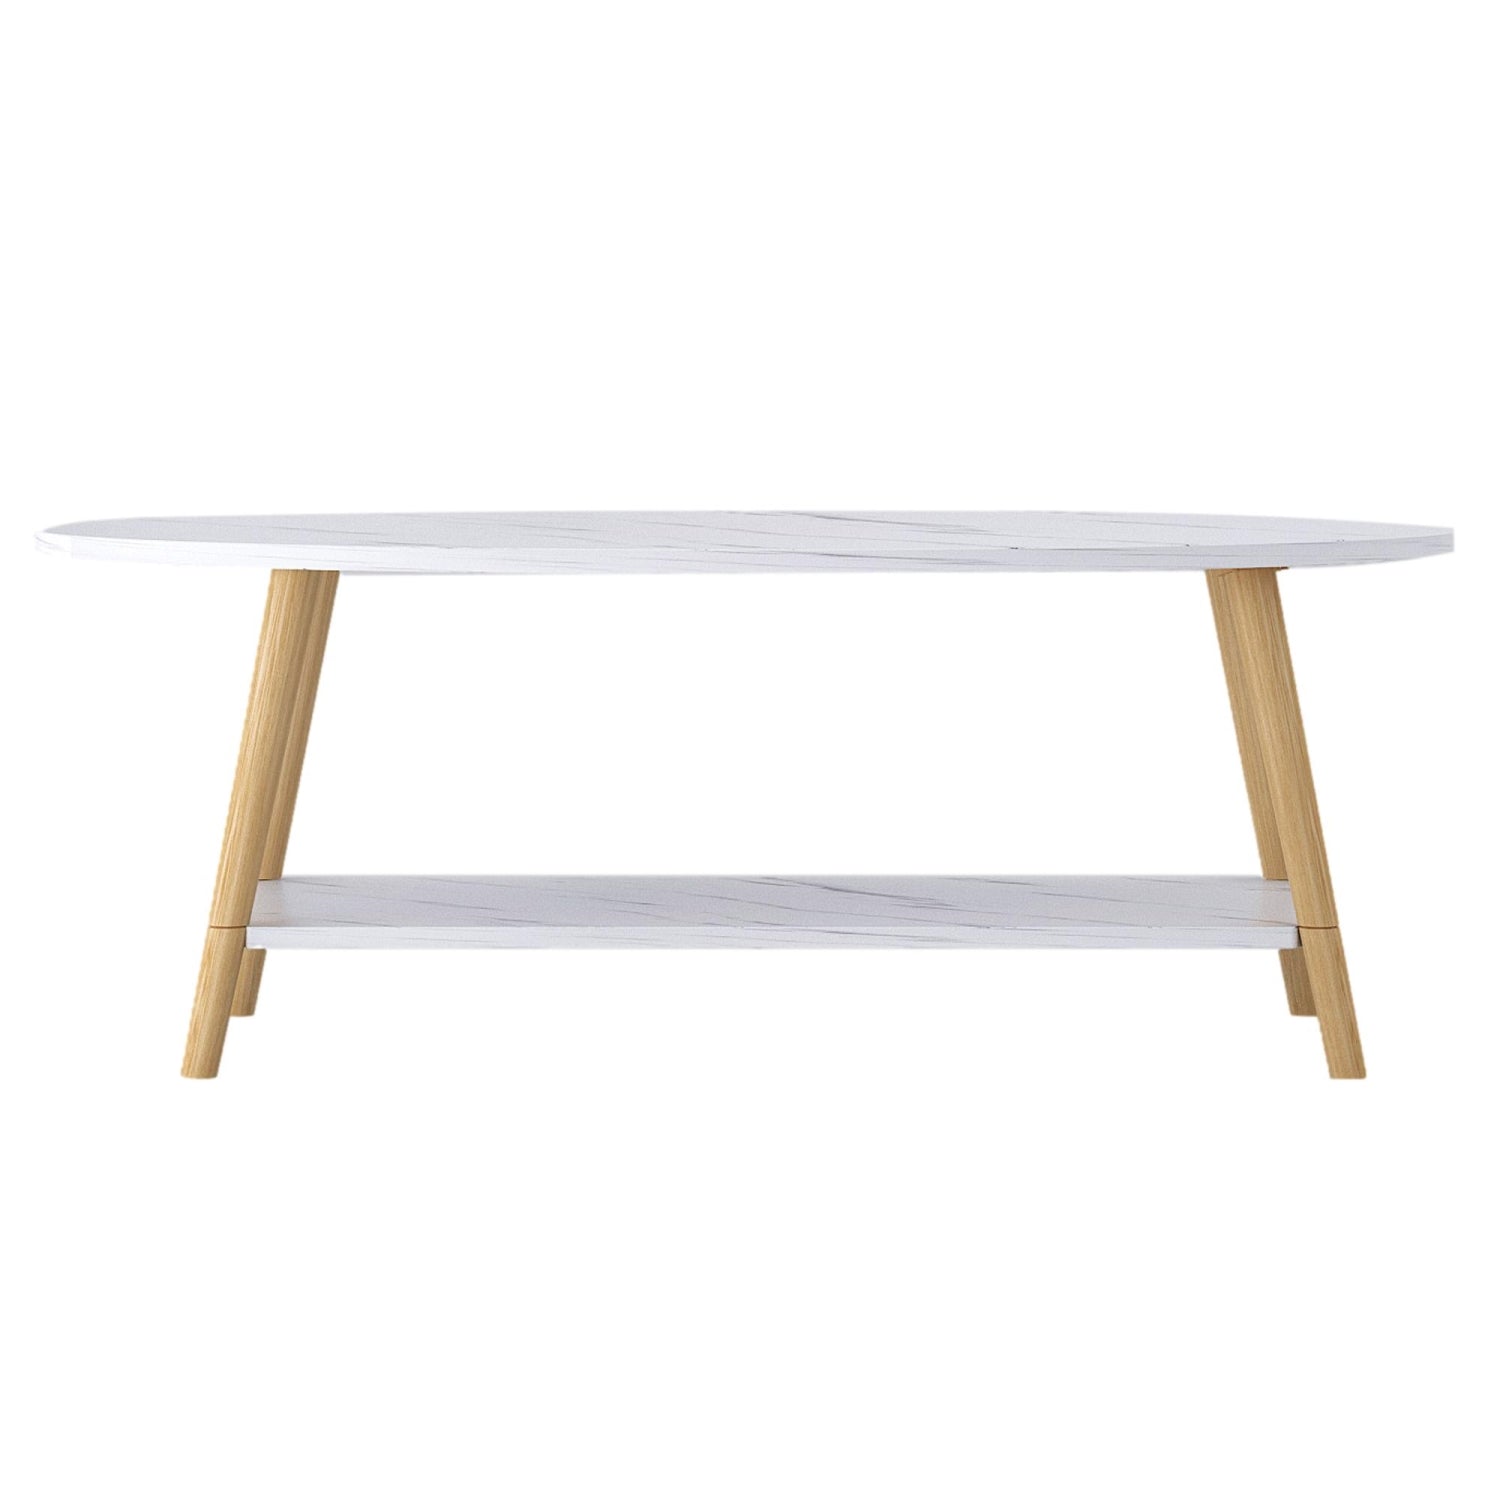 ViscoLogic IMPERIAL Mid-Century 2- Tier Coffee Table For Living Room, Bedroom (White)